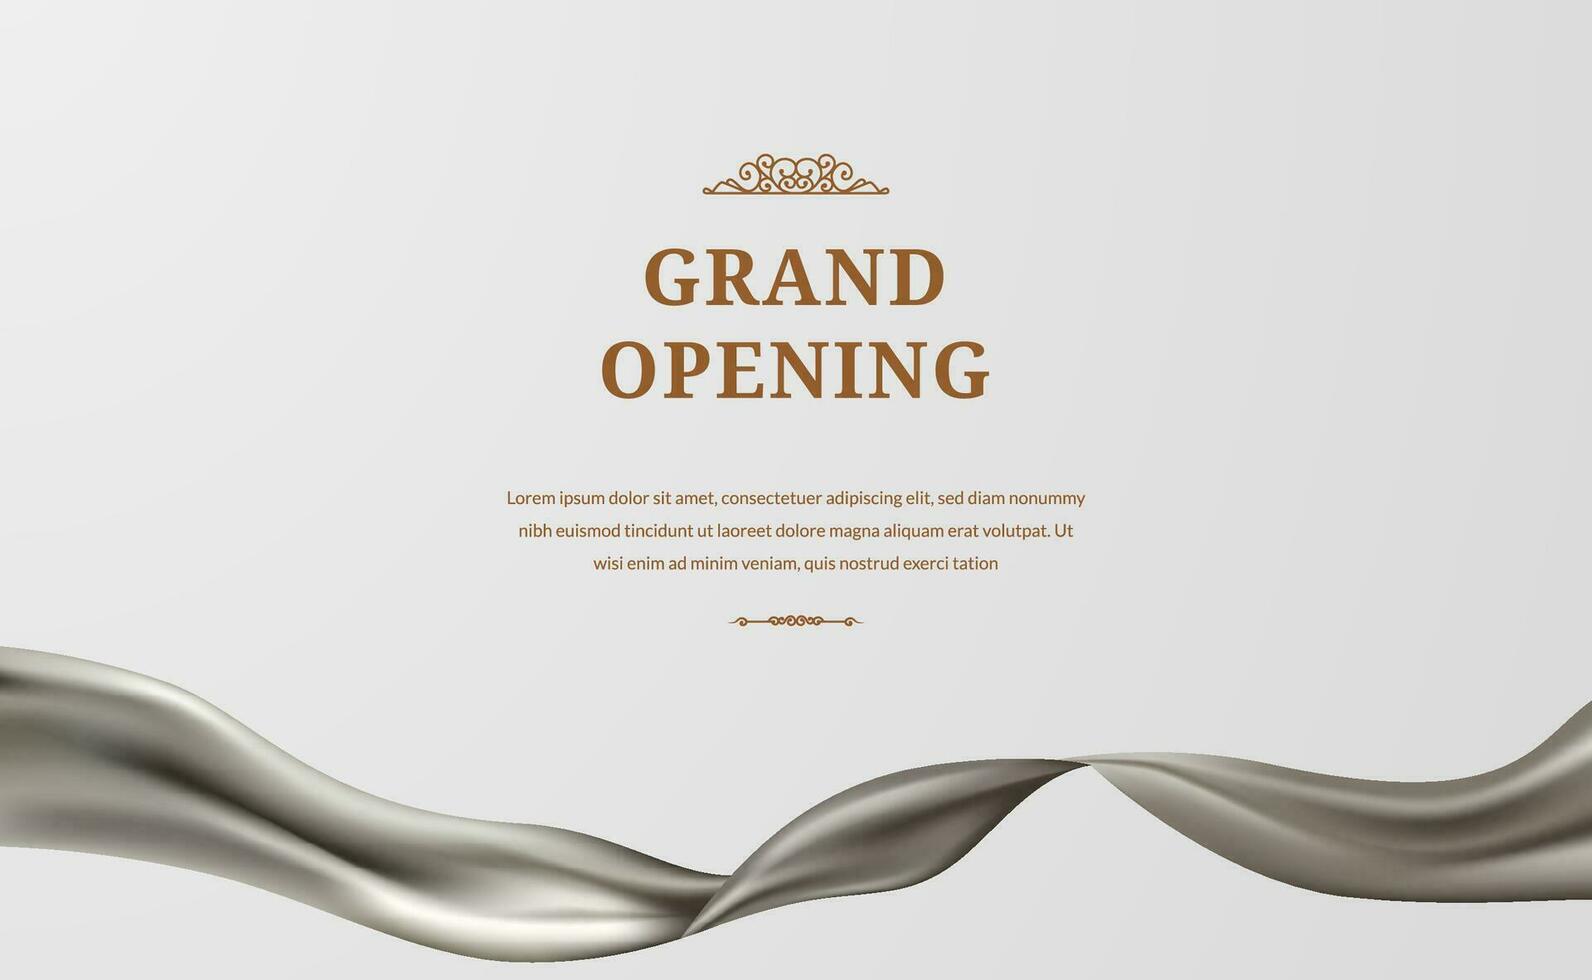 Grand opening with luxury glamour silver satin silk cloth drapery for invitation vip banner background vector